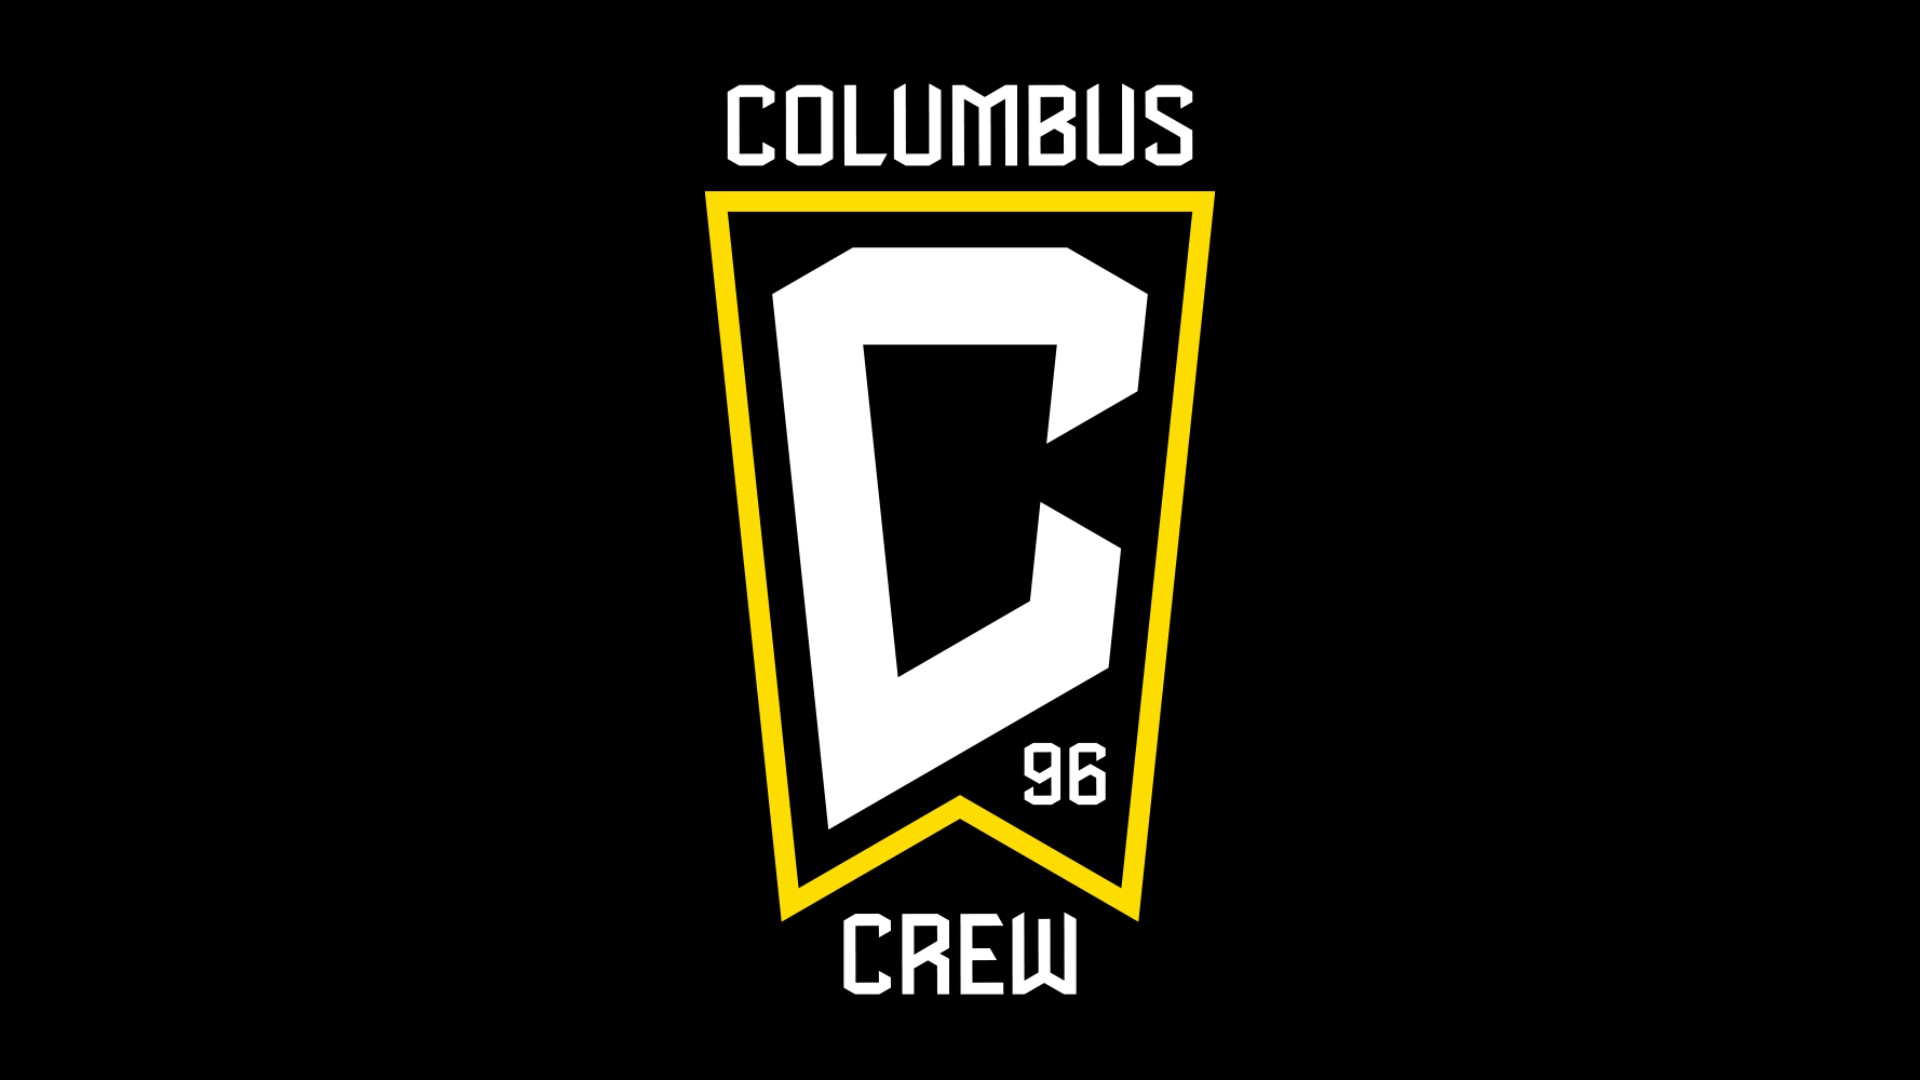 The owners of the Columbus Crew have released the club's updated logo, one day after announcing an agreement to revert back to the club's original name.